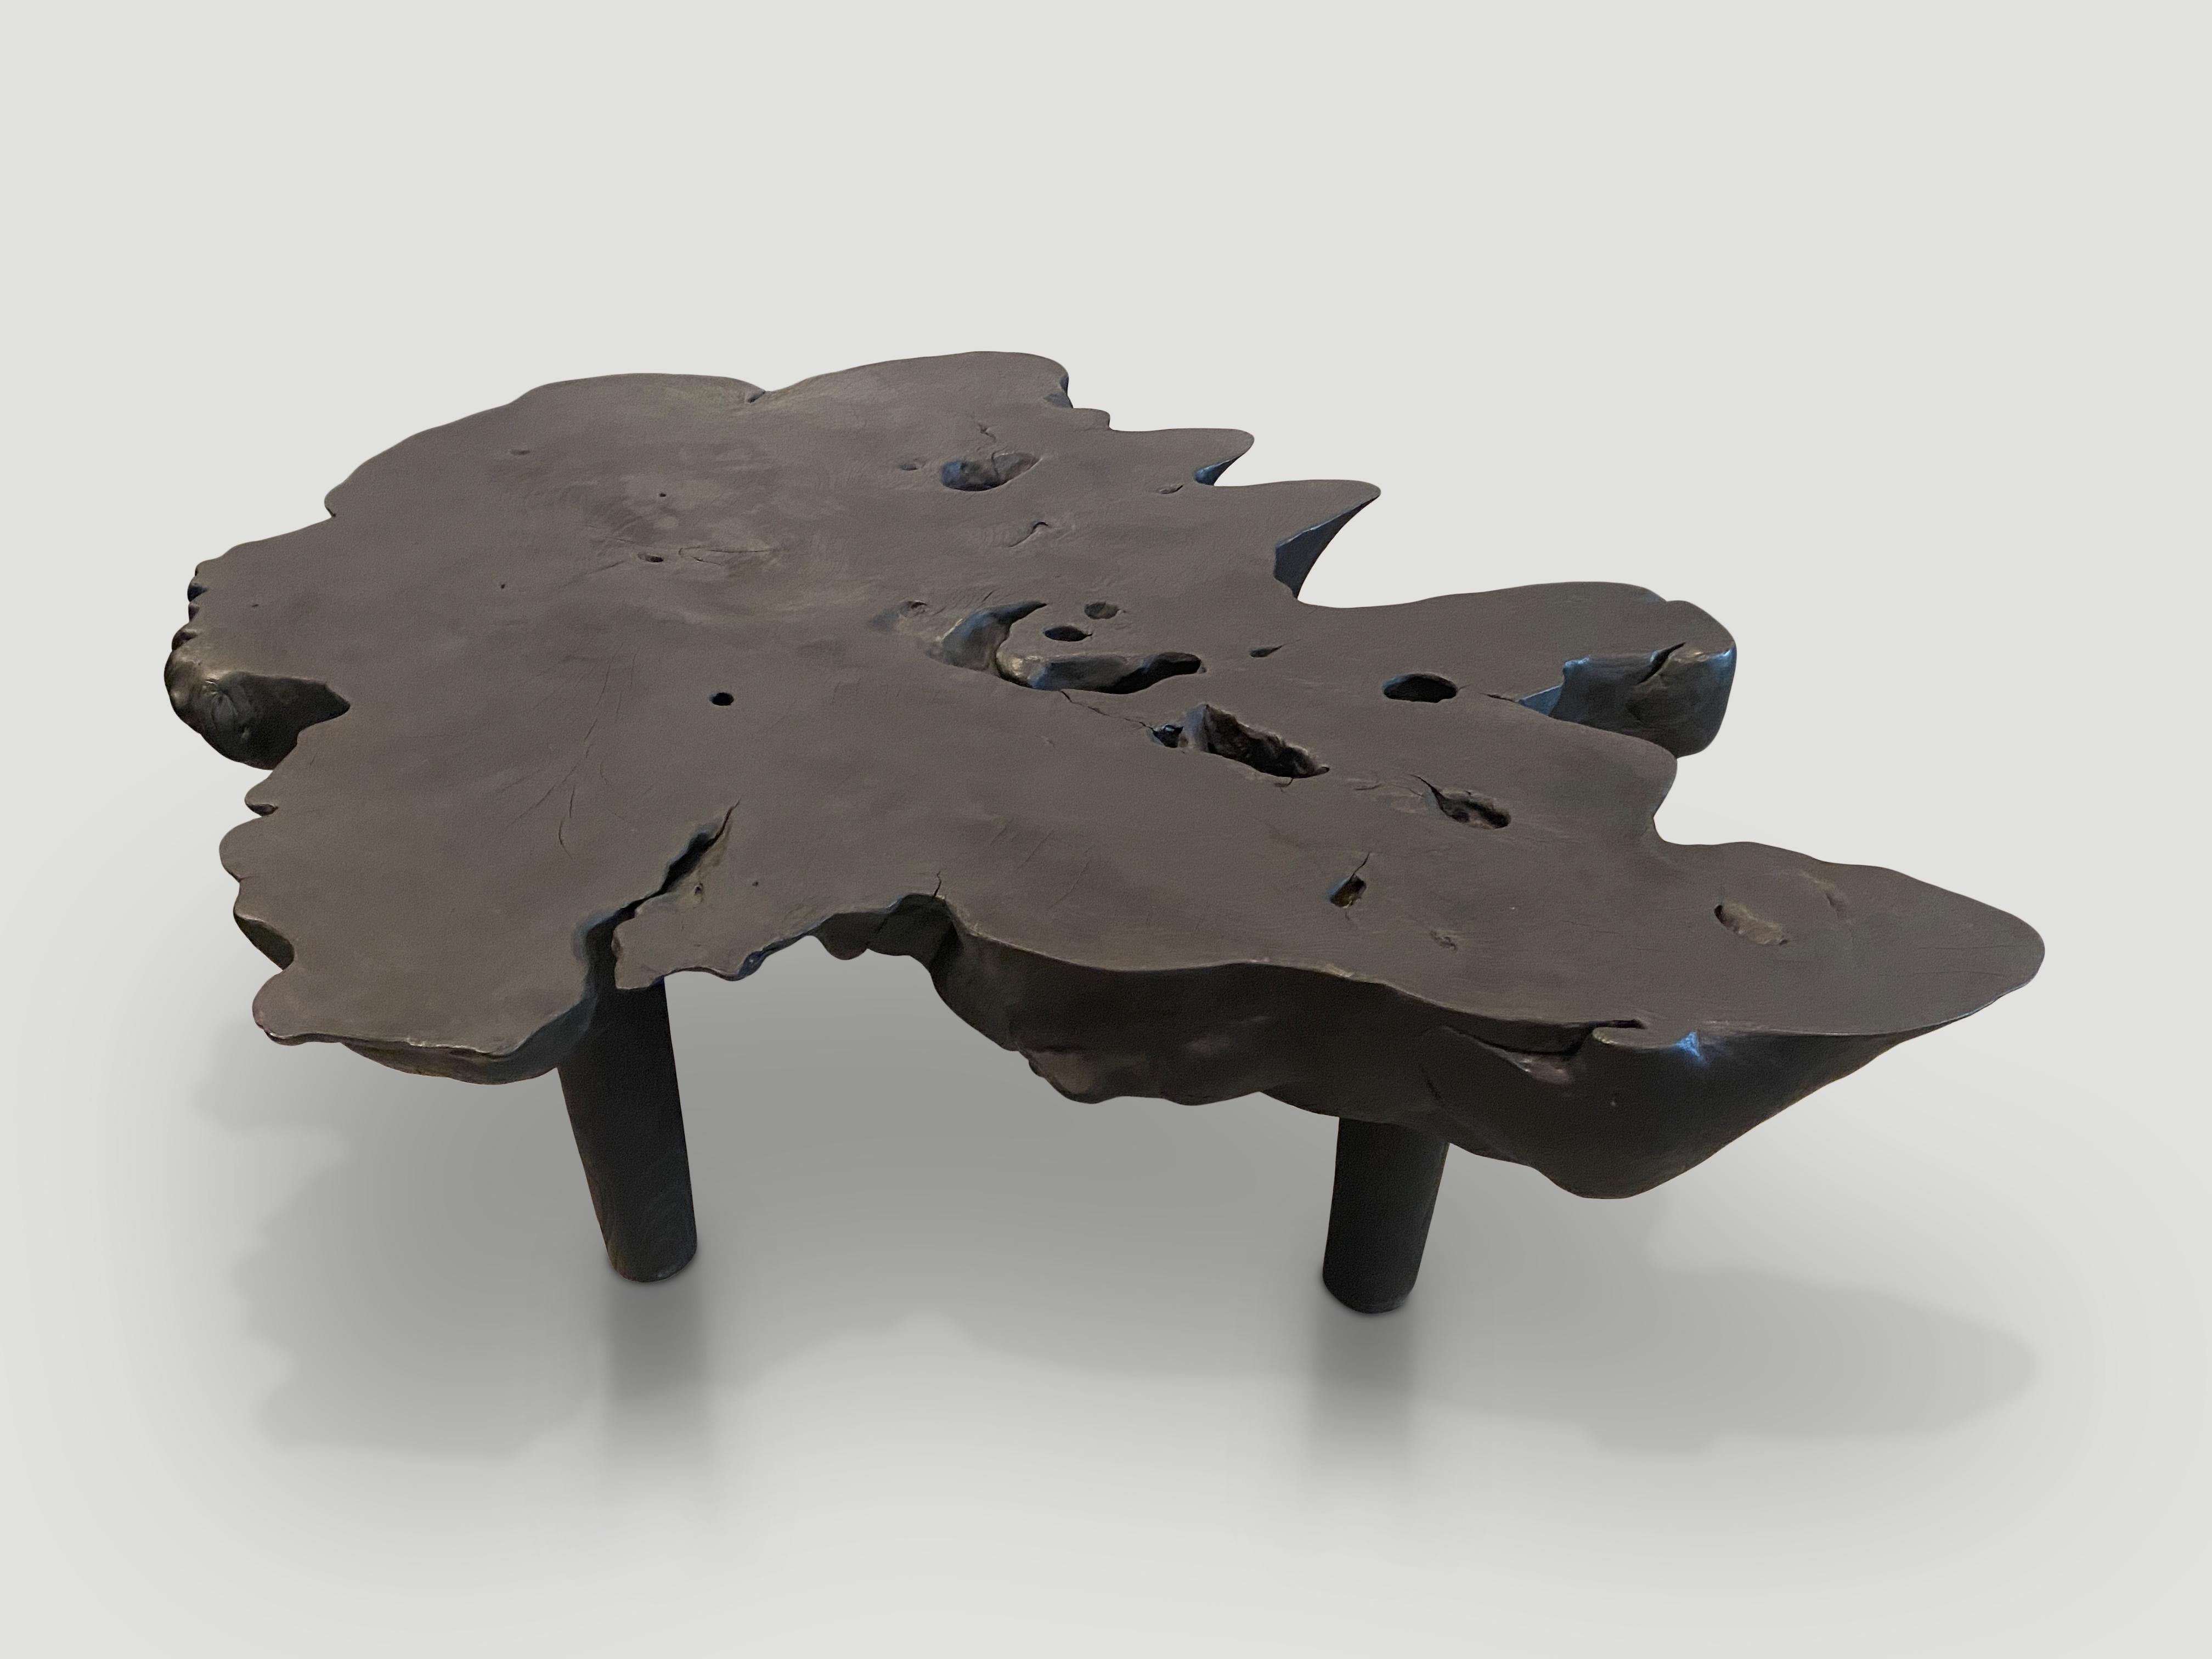 Impressive five inch single slab reclaimed teak wood coffee table. Charred, sanded and sealed exposing the beautiful grain of the wood. Floating on minimalist cylinder legs. Organic with a twist. 

The Triple Burnt Collection represents a unique